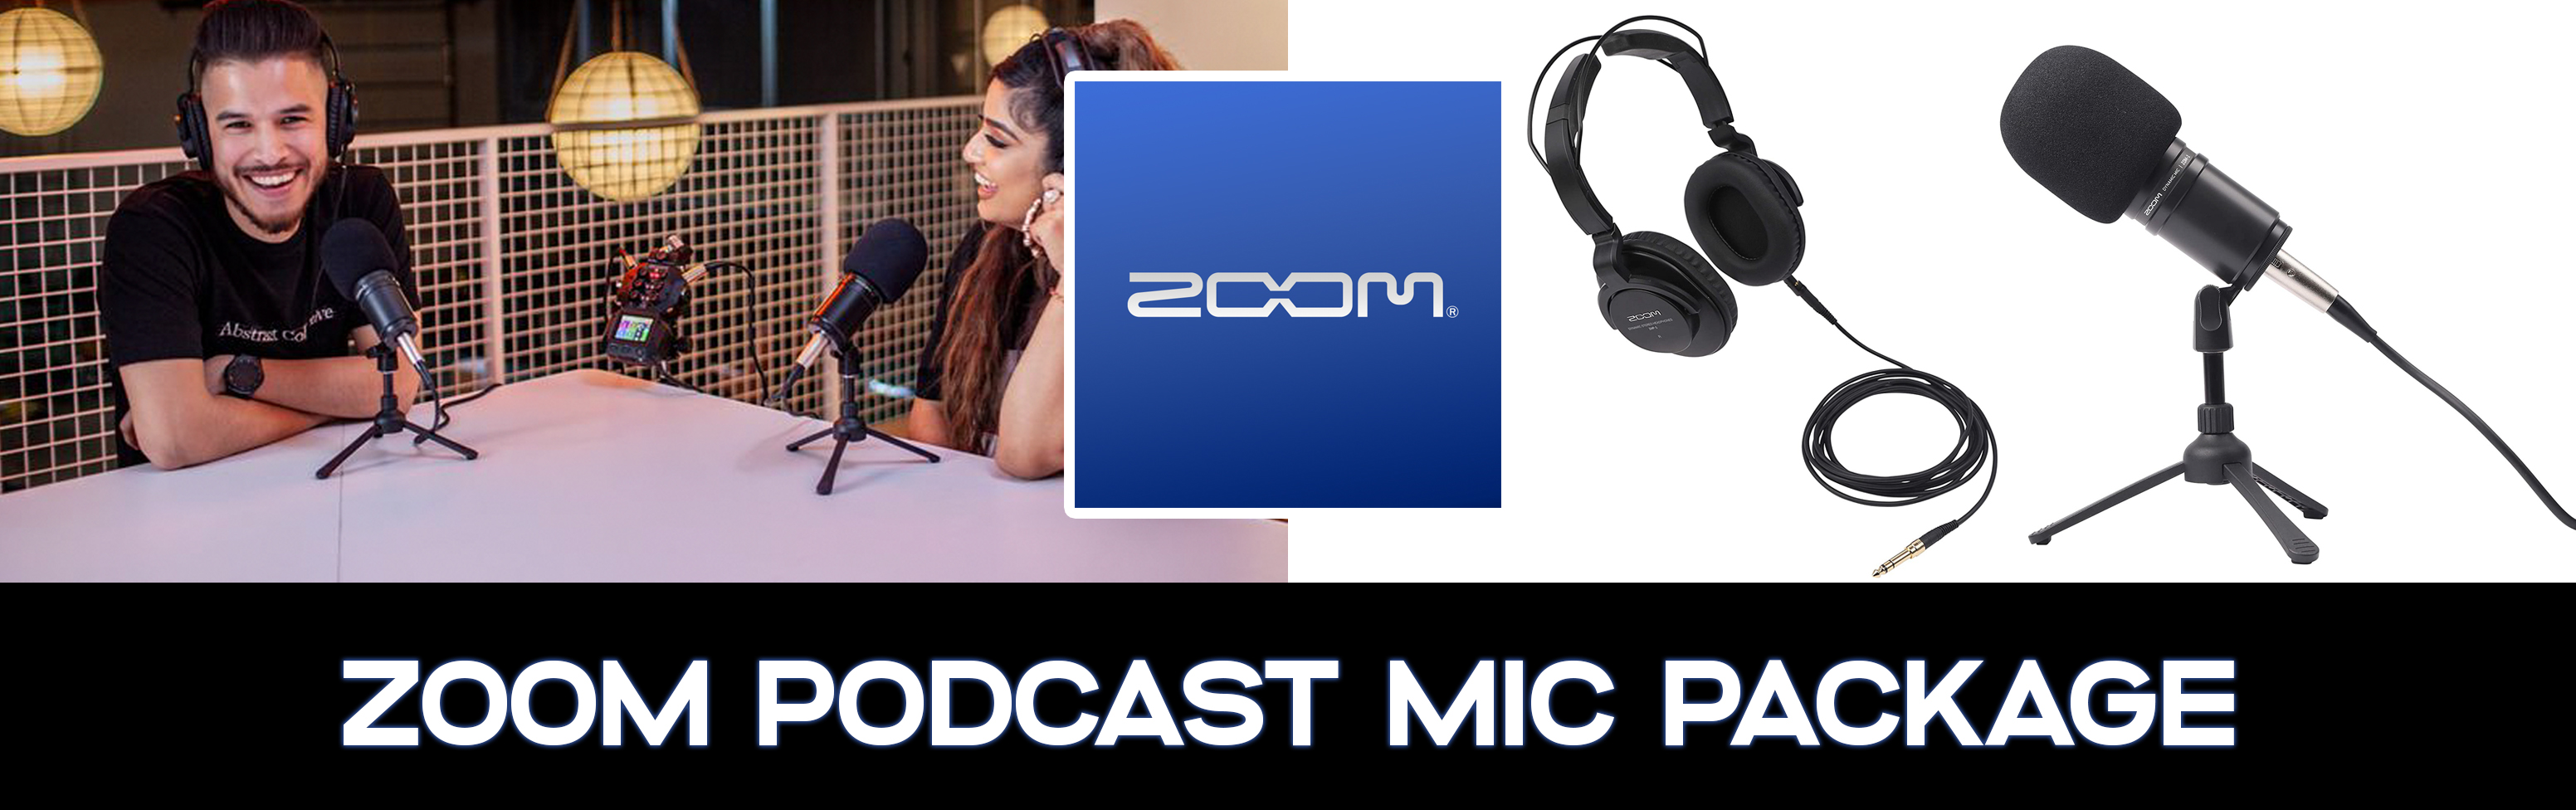 Zoom Podcast Microphone Package